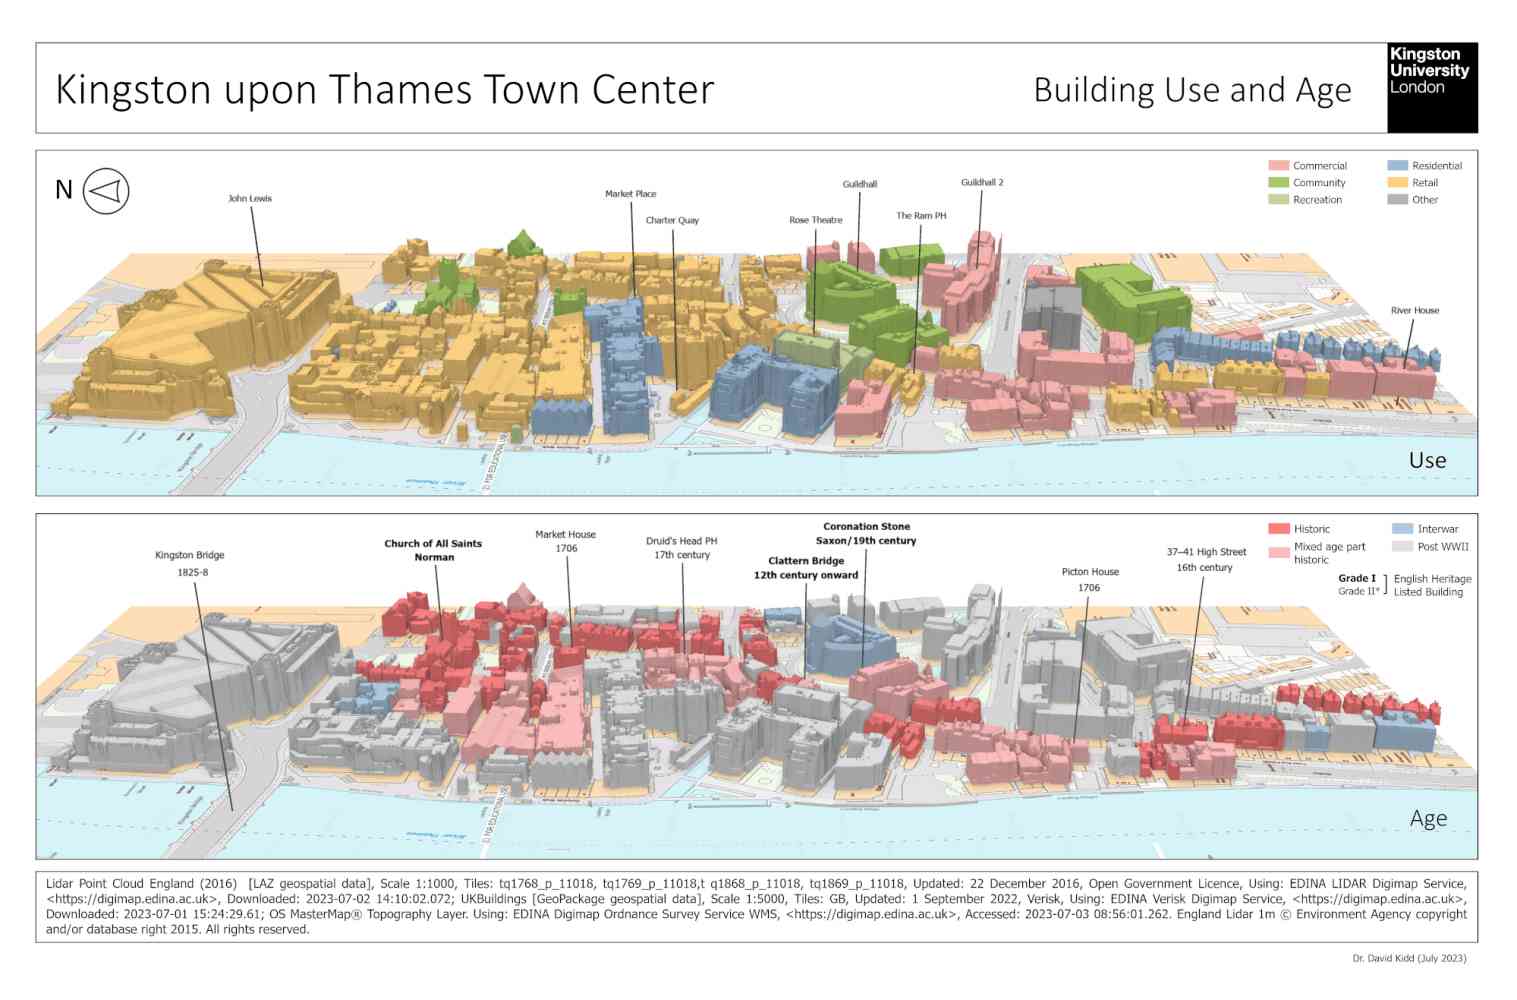 Building Use and Age in Kingston upon Thames Town Center - Combines Ordnance Survey LIDAR 3D point cloud, Verisk UK Buildings, and Historic England Listed Buildings